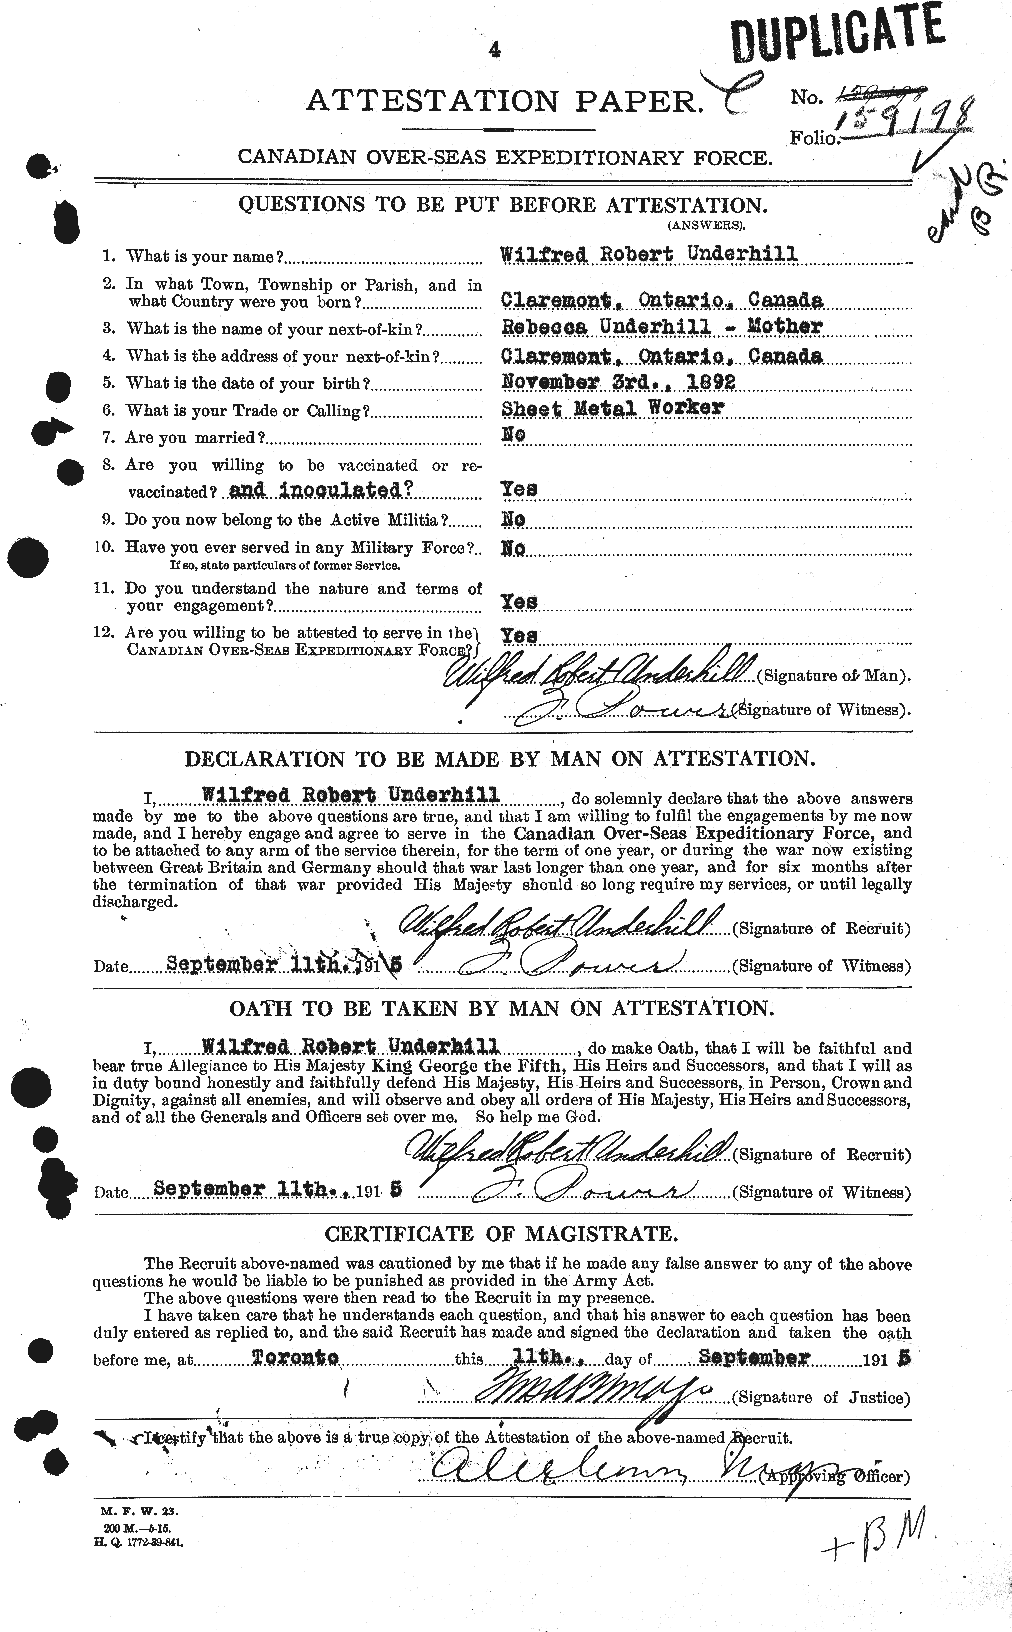 Personnel Records of the First World War - CEF 647119a